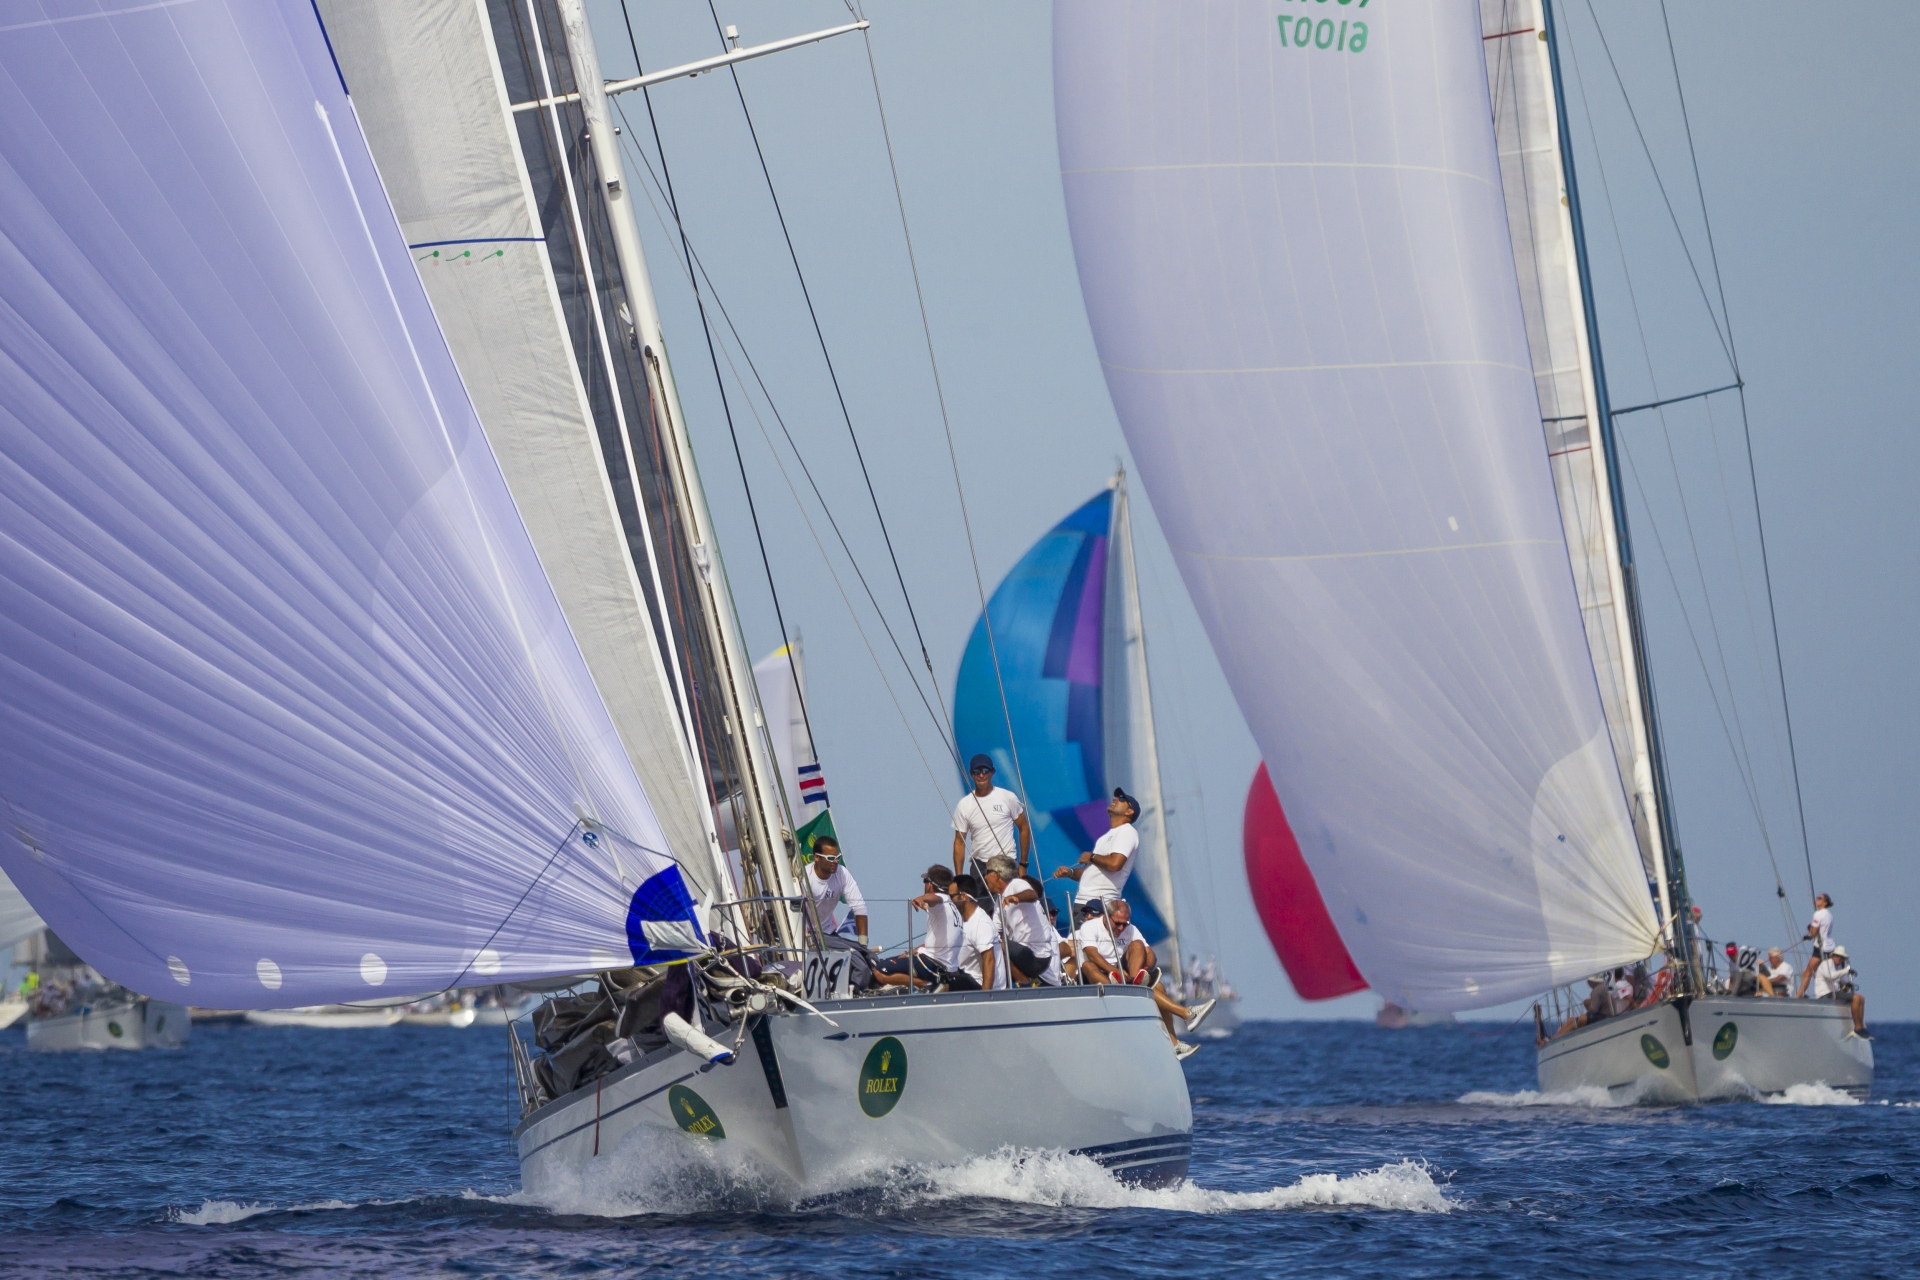 Rolex Swan Cup, more than 90 boats at 21st edition - NEWS - Yacht Club Costa Smeralda